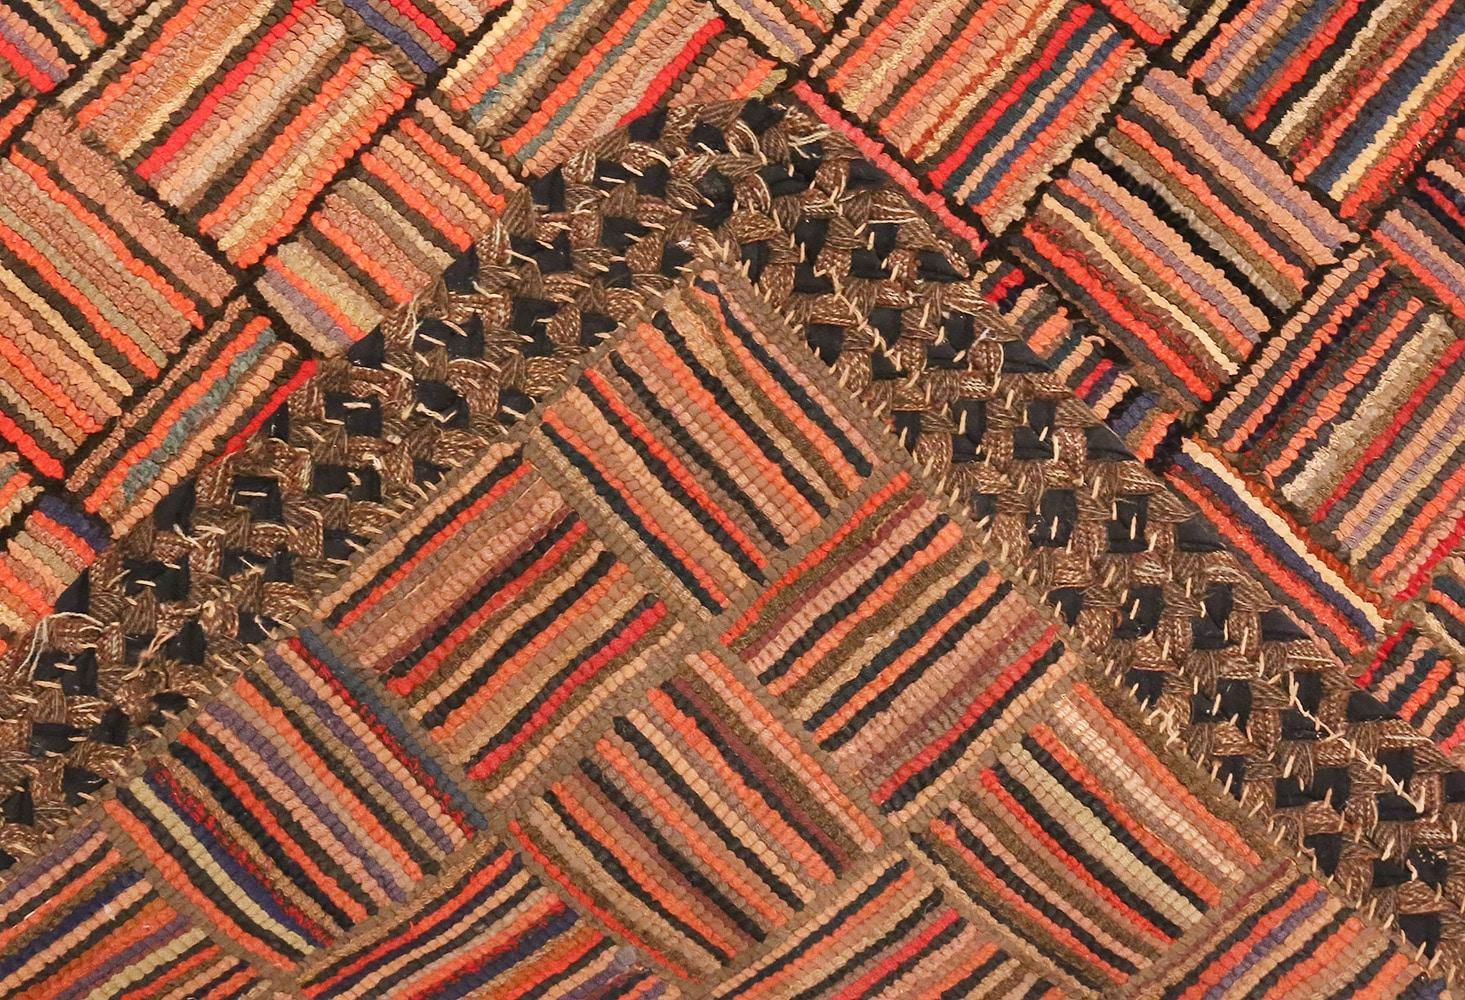 A beautiful Amish inspired antique basket weave pattern American hooked rug, country of origin / rugs type: antique American rugs, circa early 20th century.